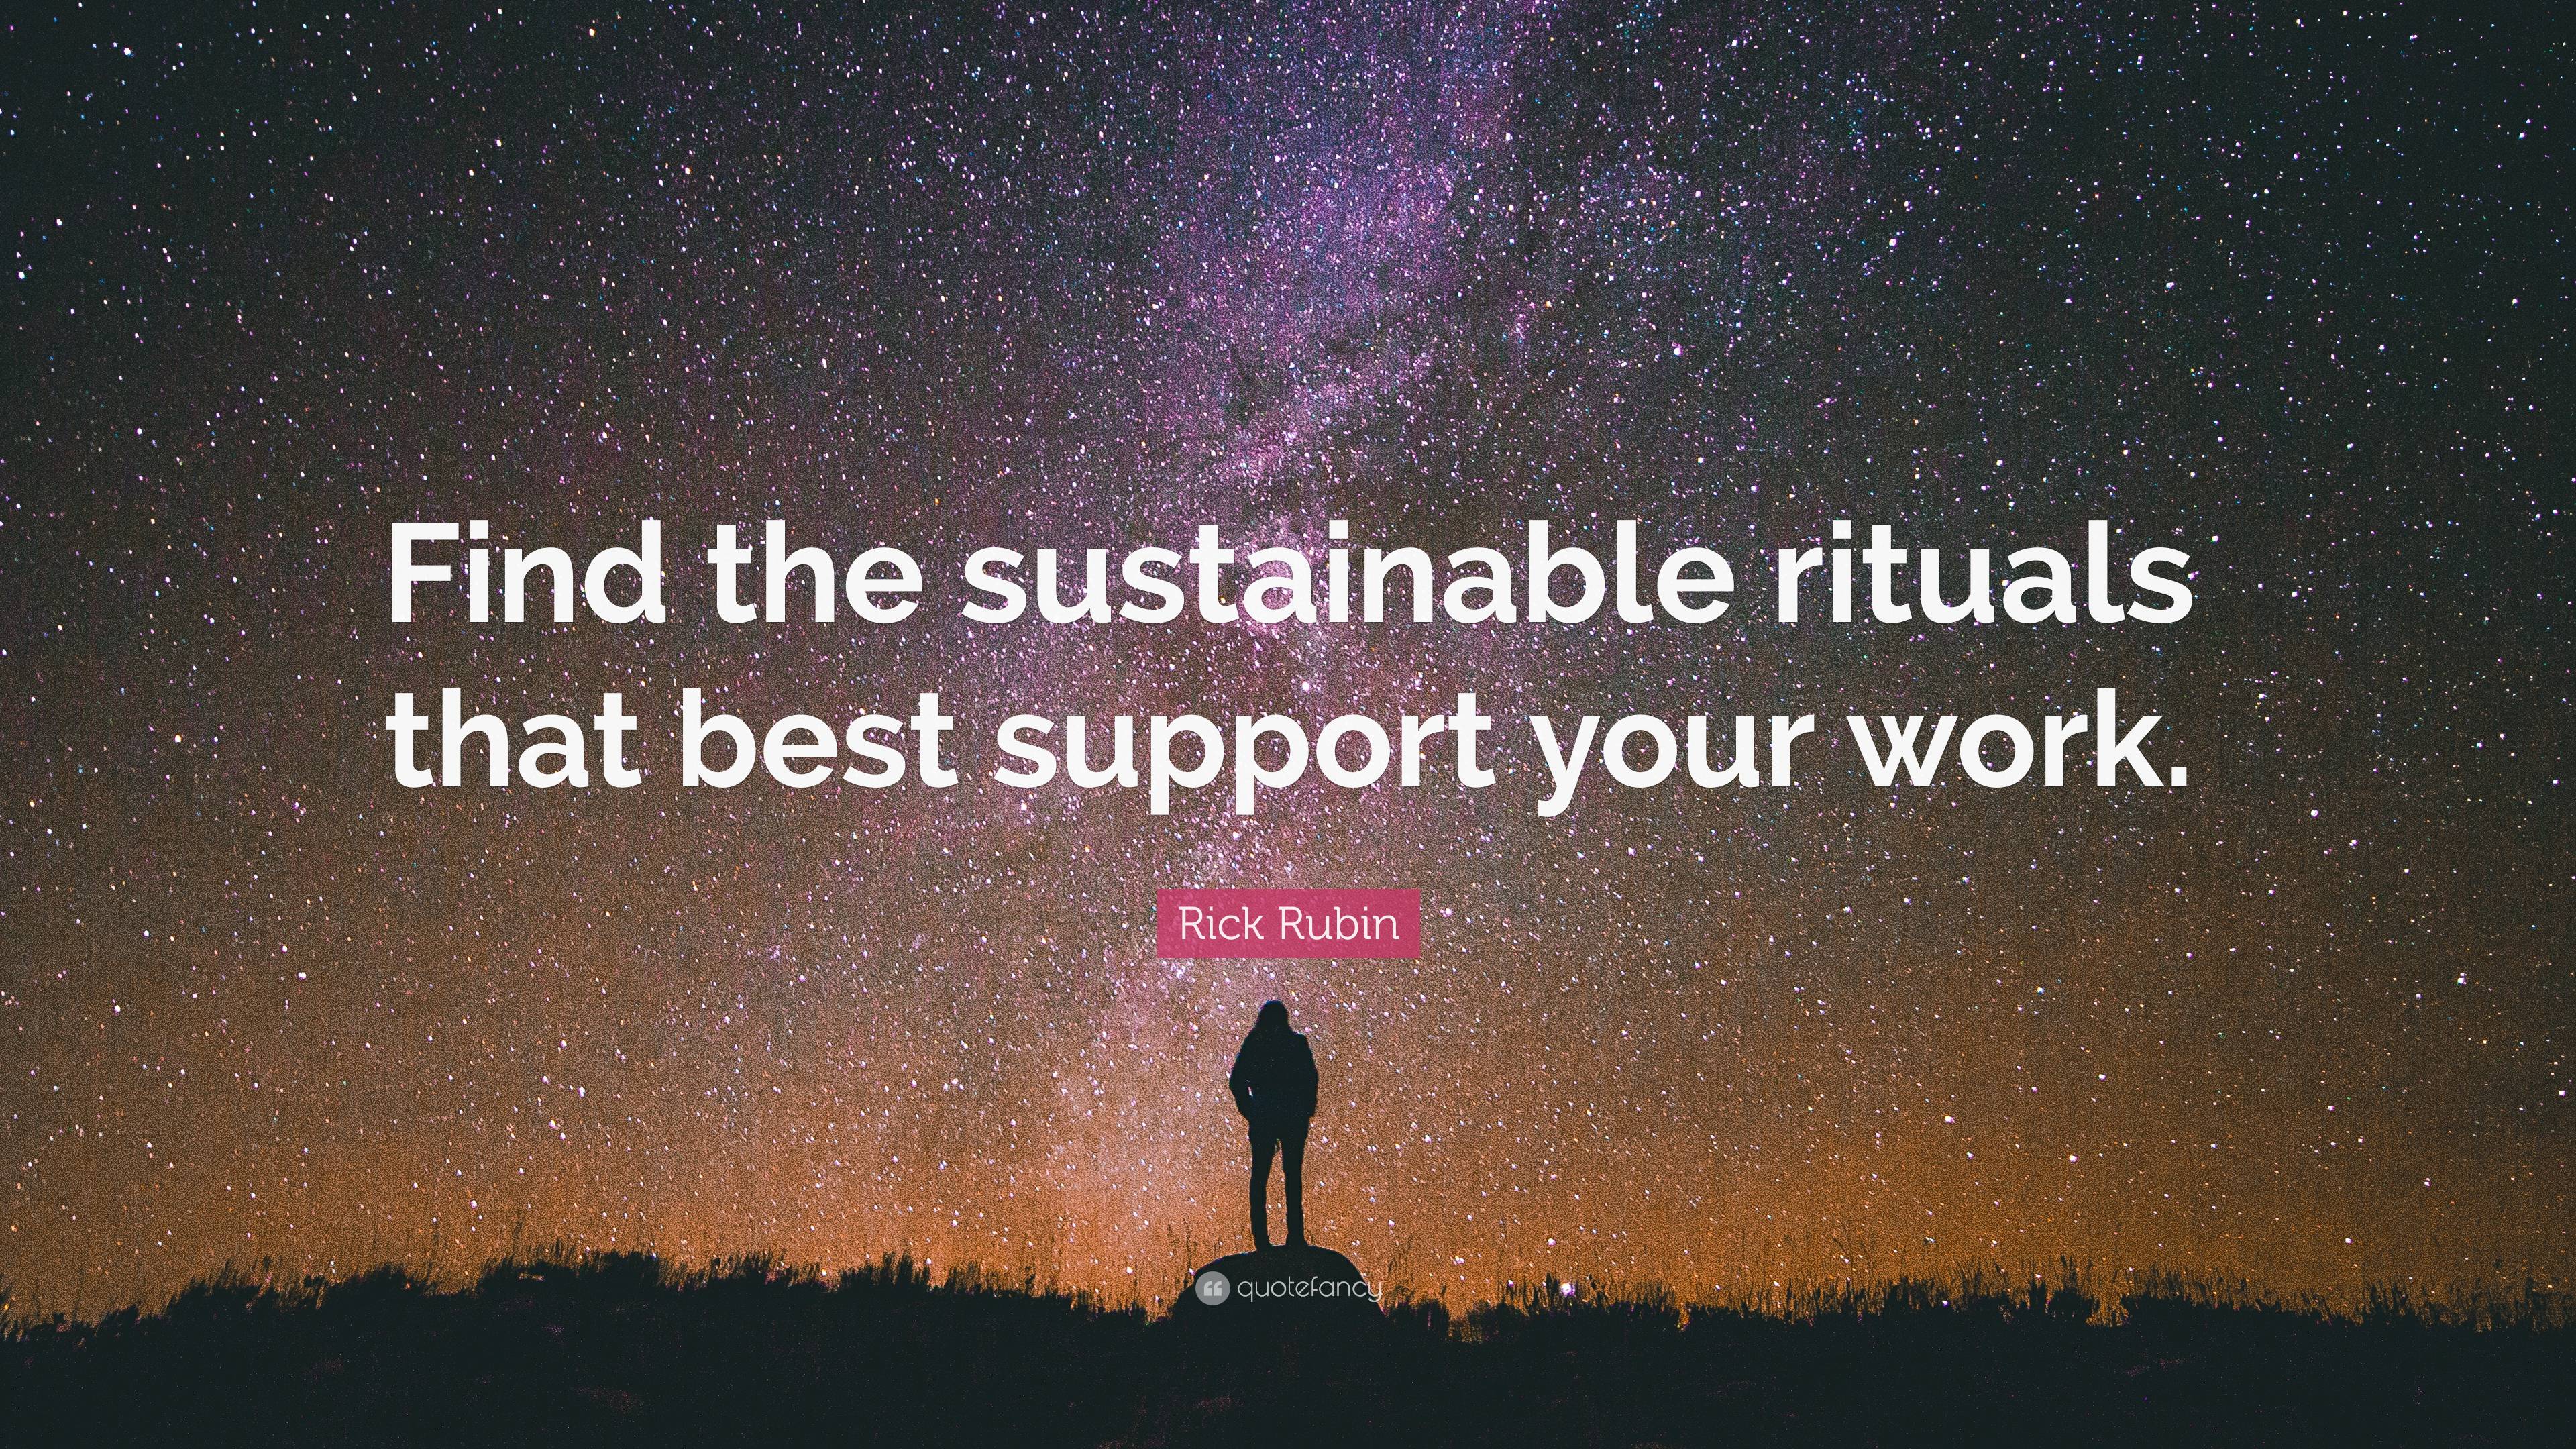 https://quotefancy.com/media/wallpaper/3840x2160/7424027-Rick-Rubin-Quote-Find-the-sustainable-rituals-that-best-support.jpg